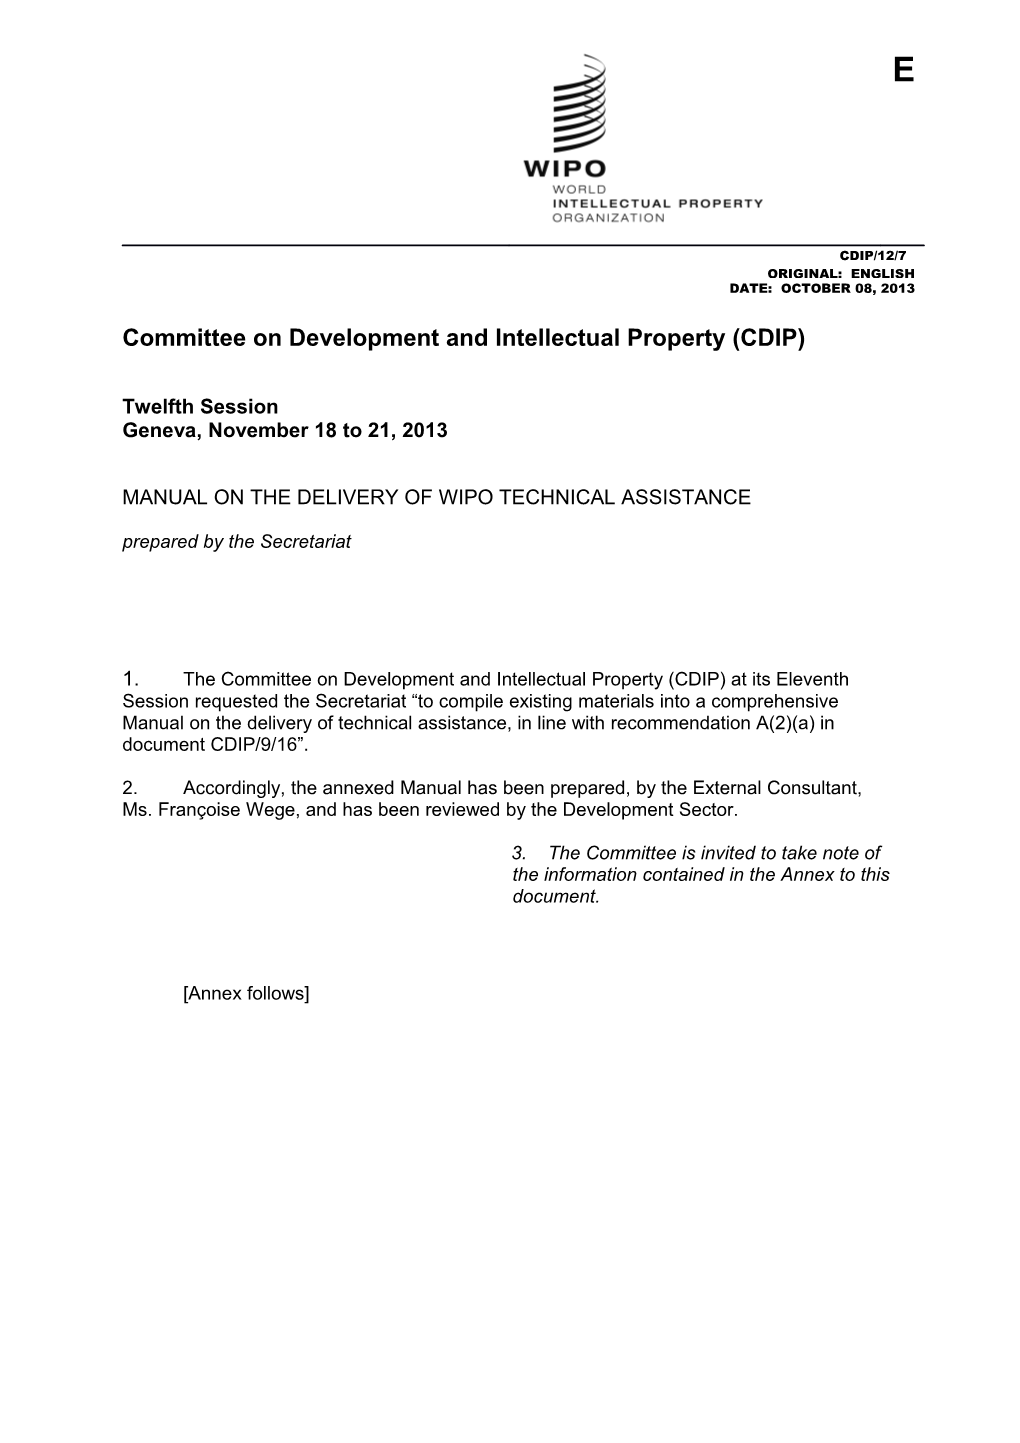 Committee on Development and Intellectual Property (CDIP) s4